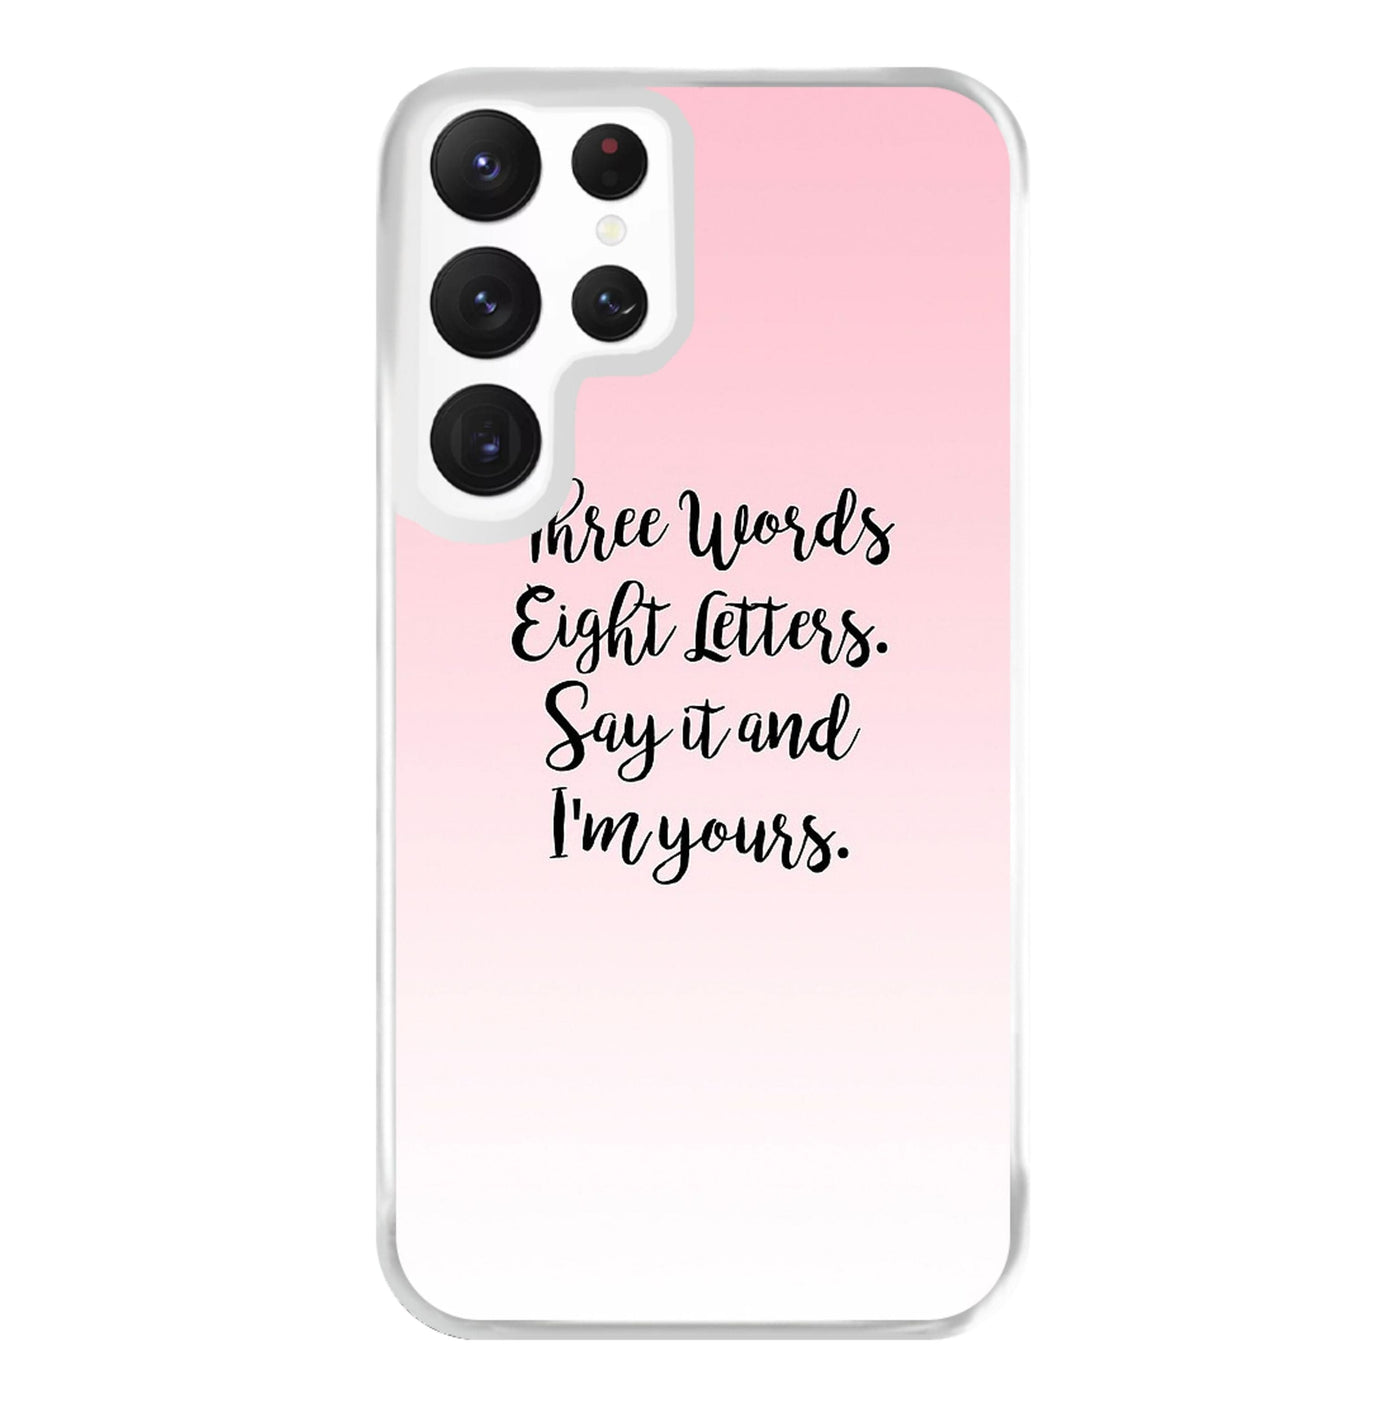 Three Words, Eight Letters - Gossip Girl Phone Case